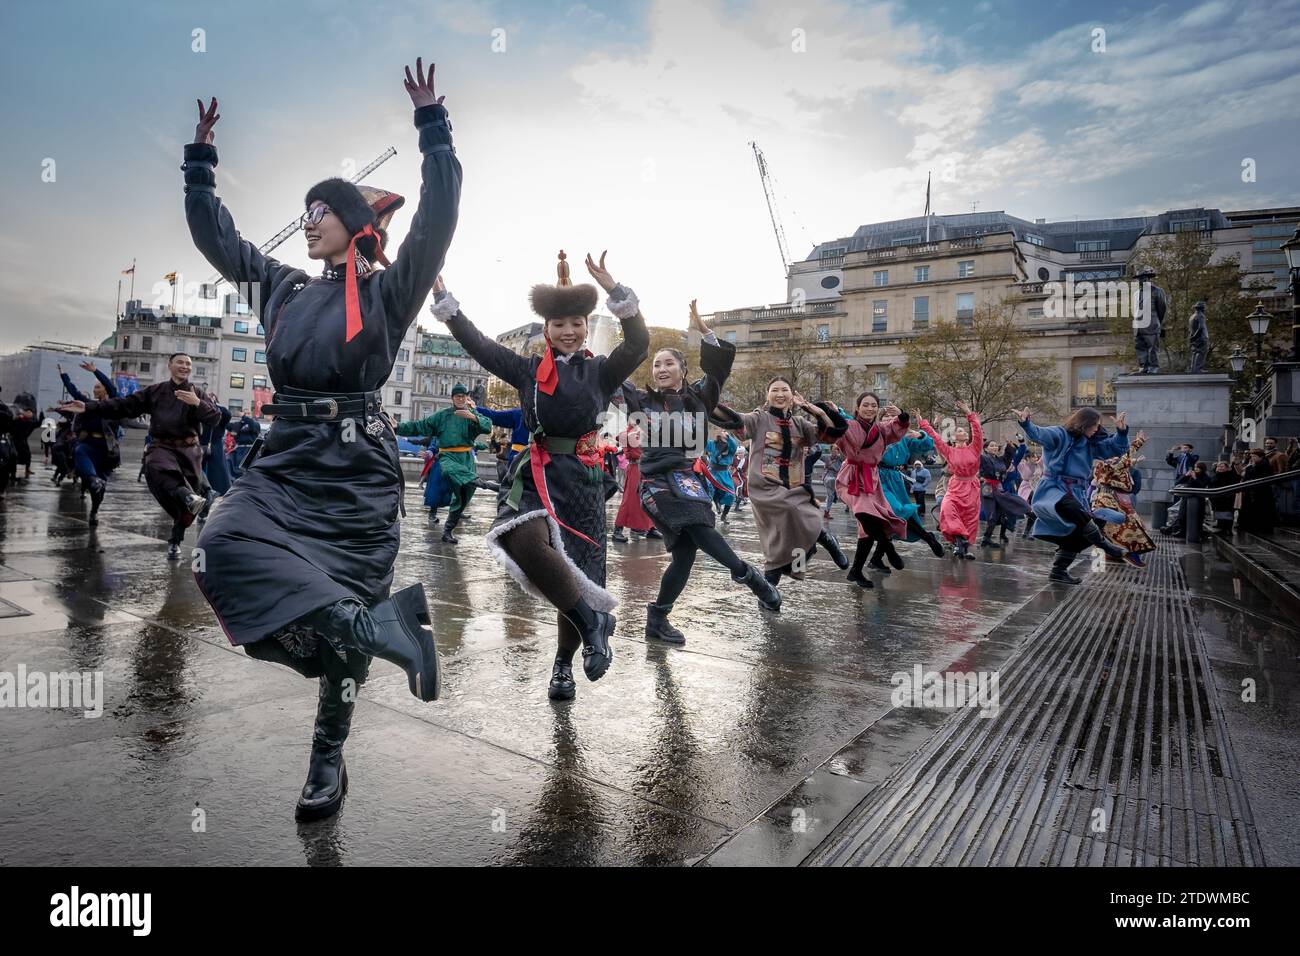 Performers from The Mongol Khan production perform in Trafalgar Square ahead of the show opening, London, UK. Stock Photo